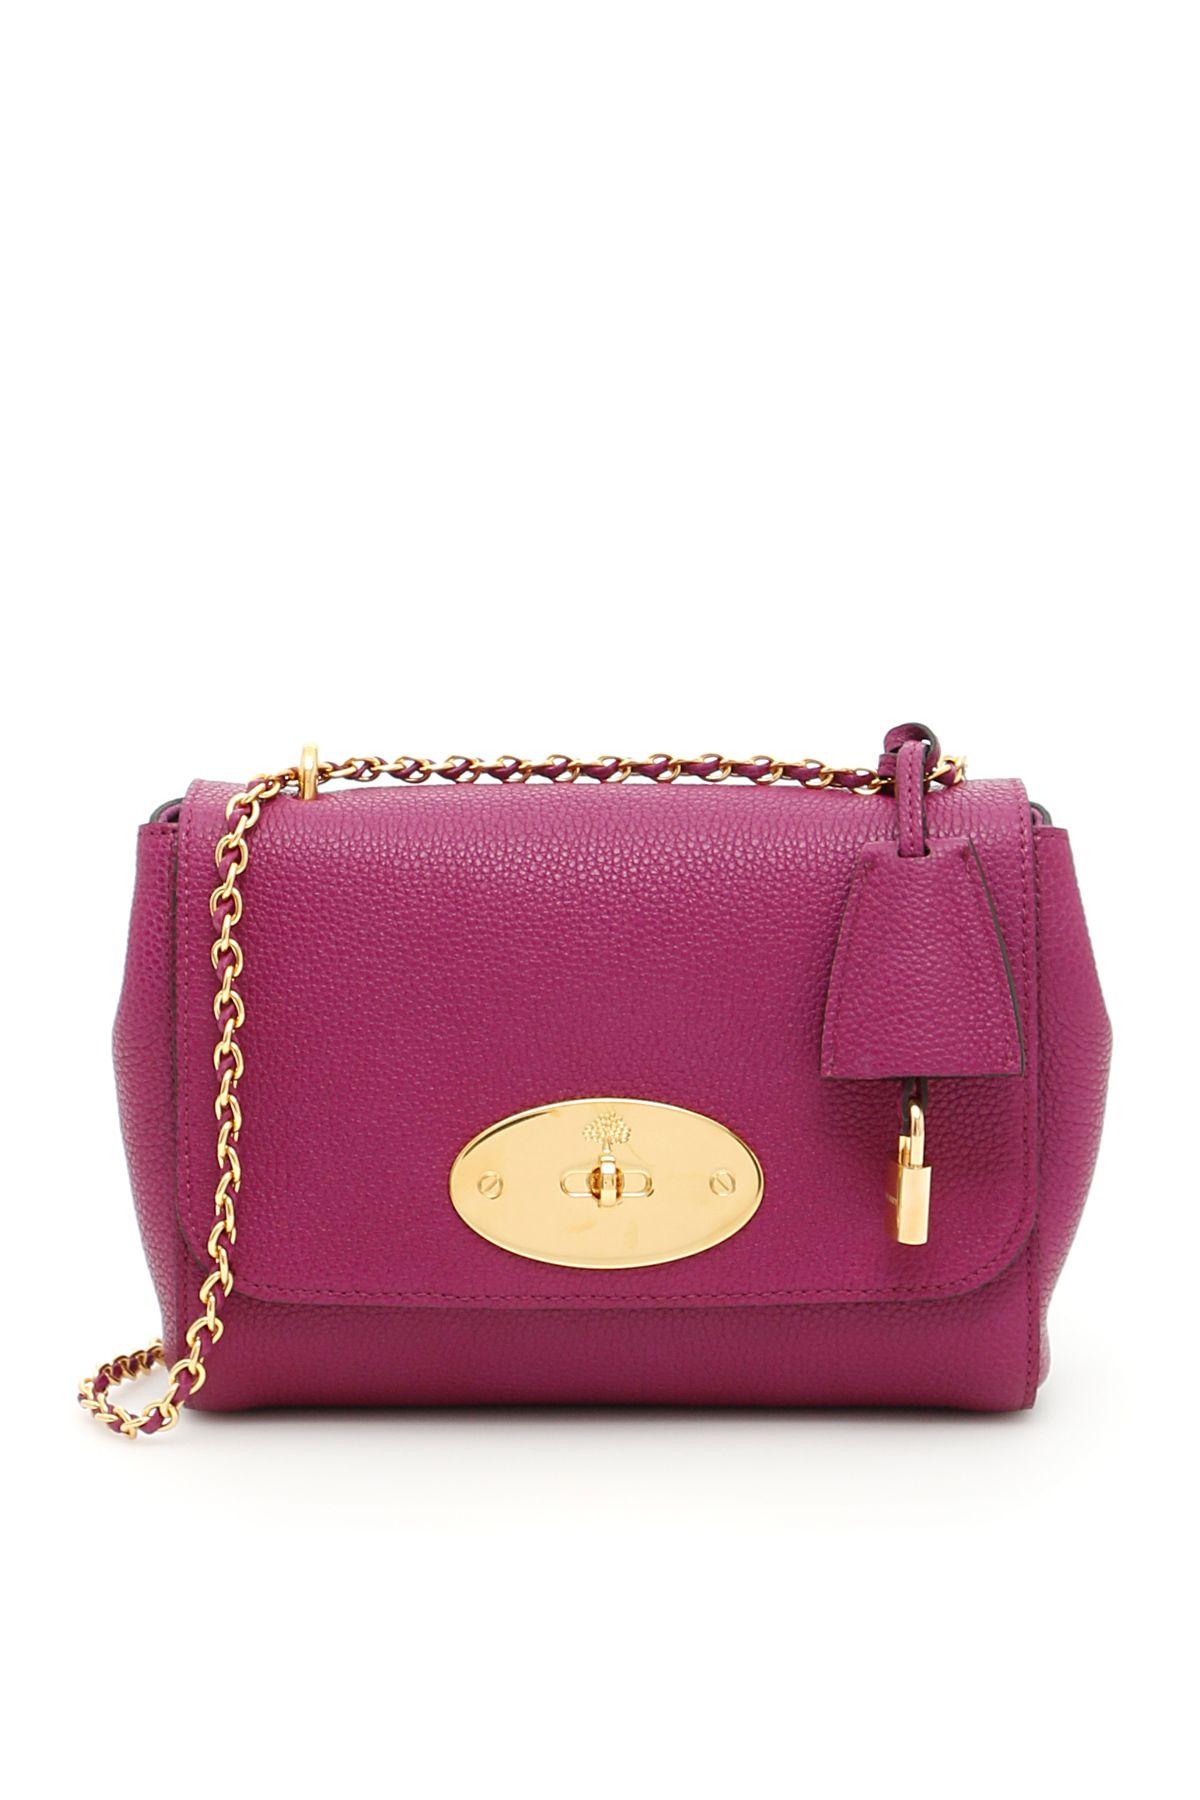 Mulberry Classic Grain Small Lily Bag In Violetviola | ModeSens